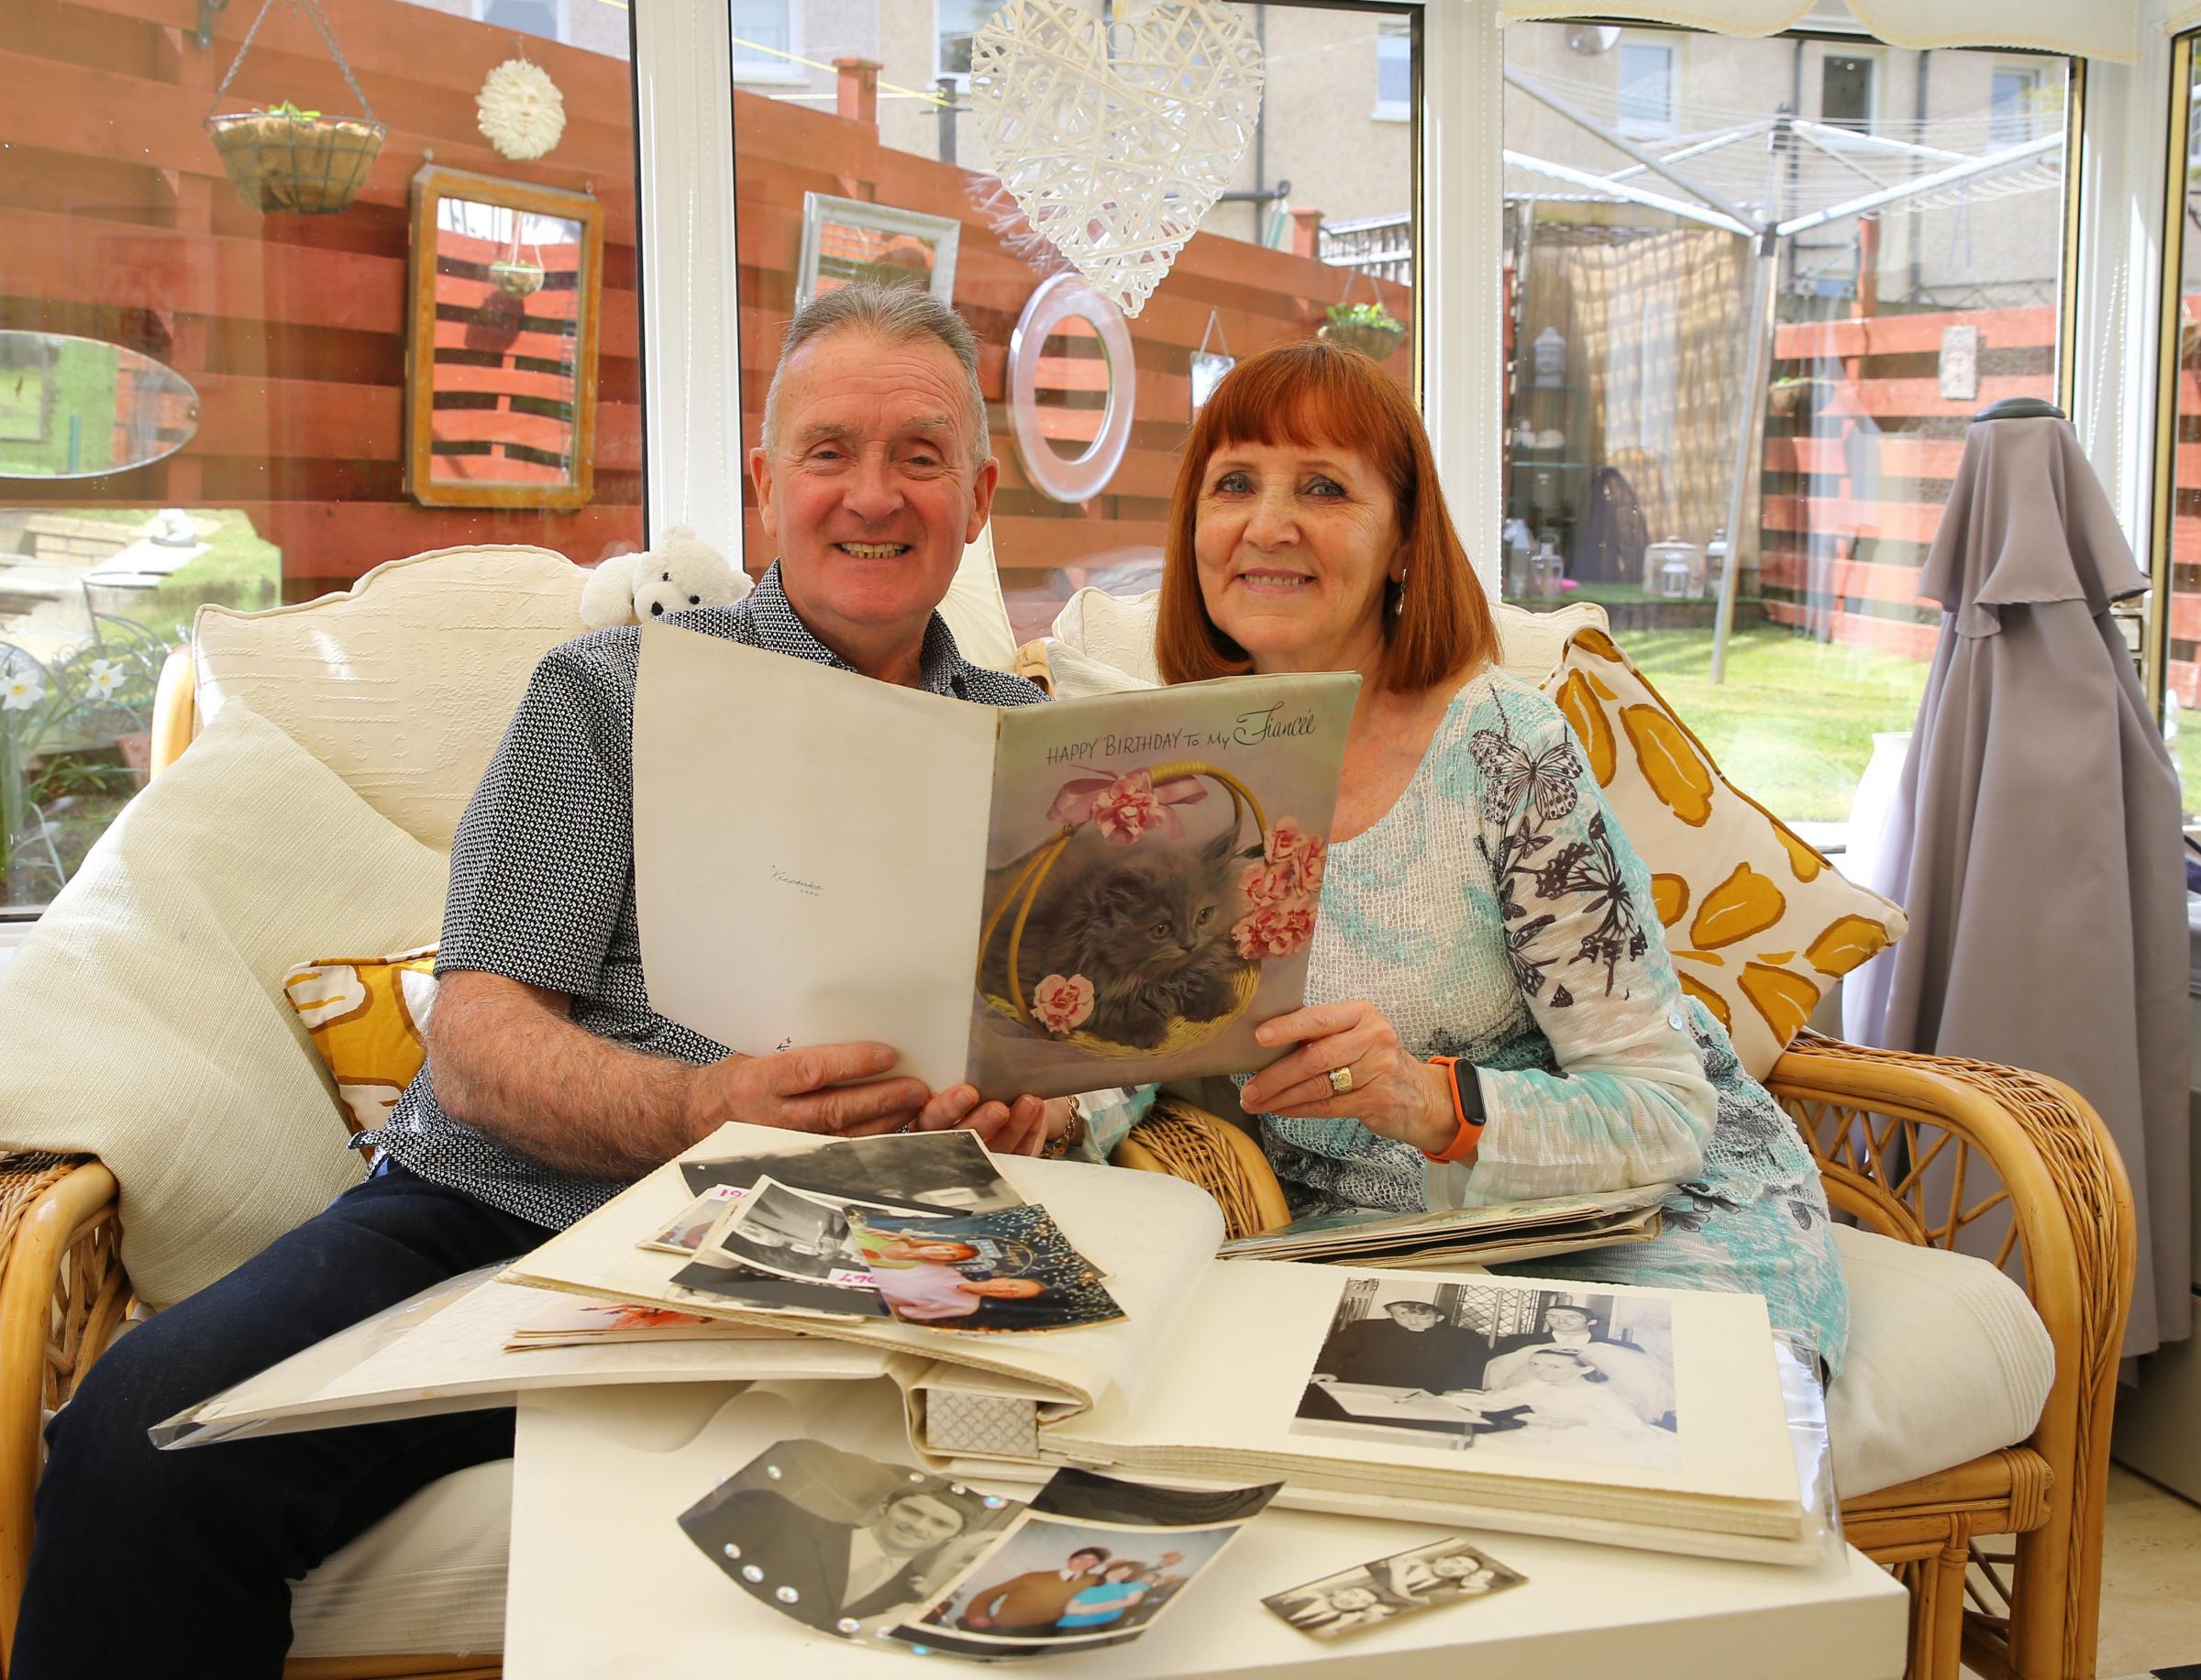 Glasgow Times past feature. Isabel and Brian McNulty pictured at home in Milton, Glasgow. The couple have been together for 53 years after meeting at school, courting at the dancing, and marrying at 18. They are holding a birthday card that Brian gave to